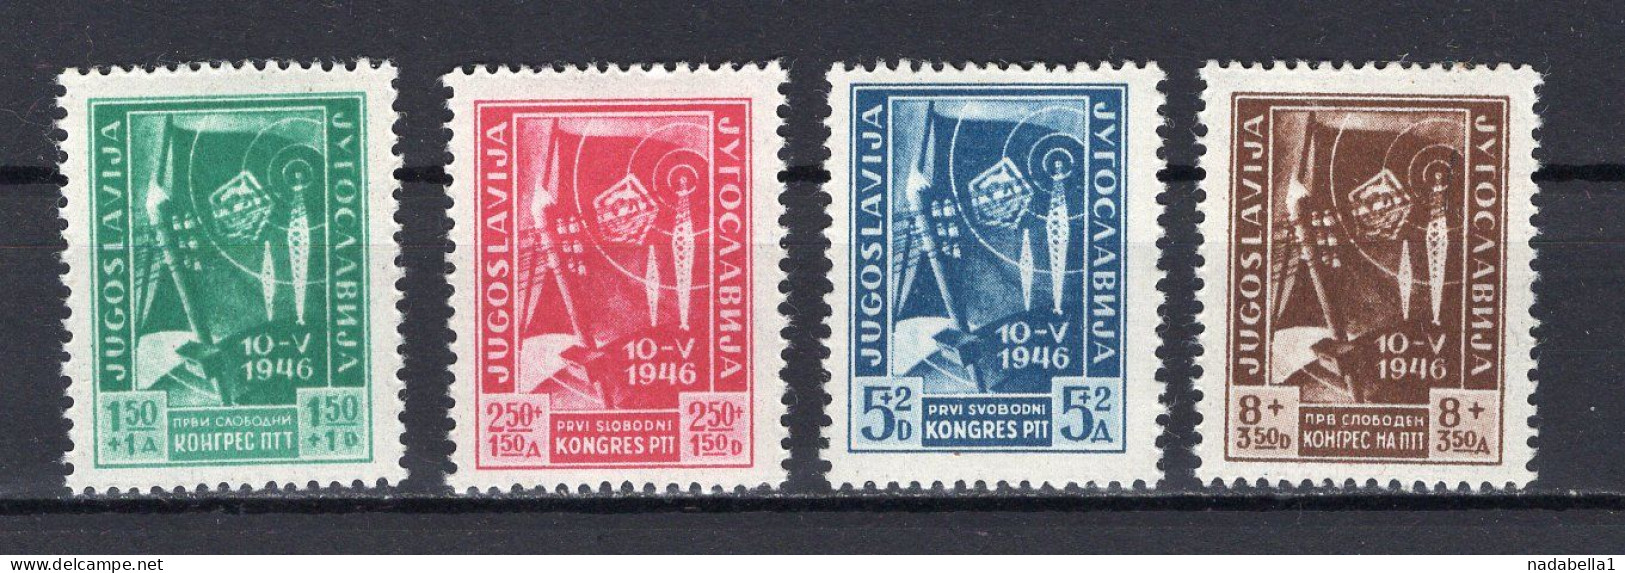 1946. YUGOSLAVIA,FIRST PTT CONGRESS,SET OF 4 STAMPS,MNH - Unused Stamps